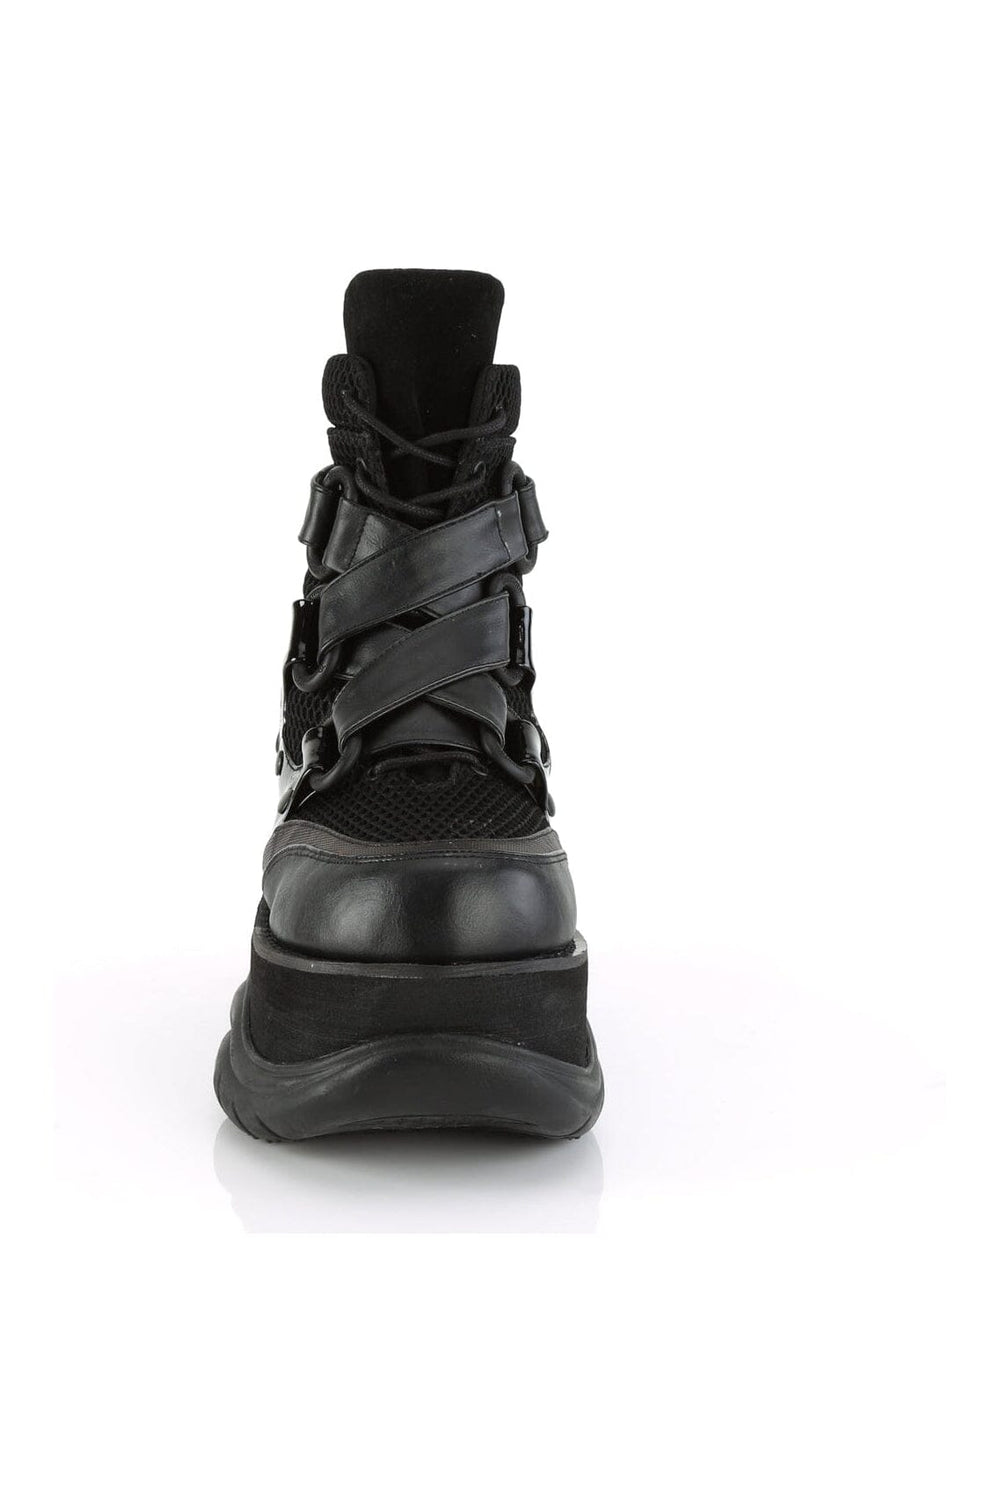 NEPTUNE-126 Black Vegan Leather Ankle Boot-Ankle Boots-Demonia-SEXYSHOES.COM